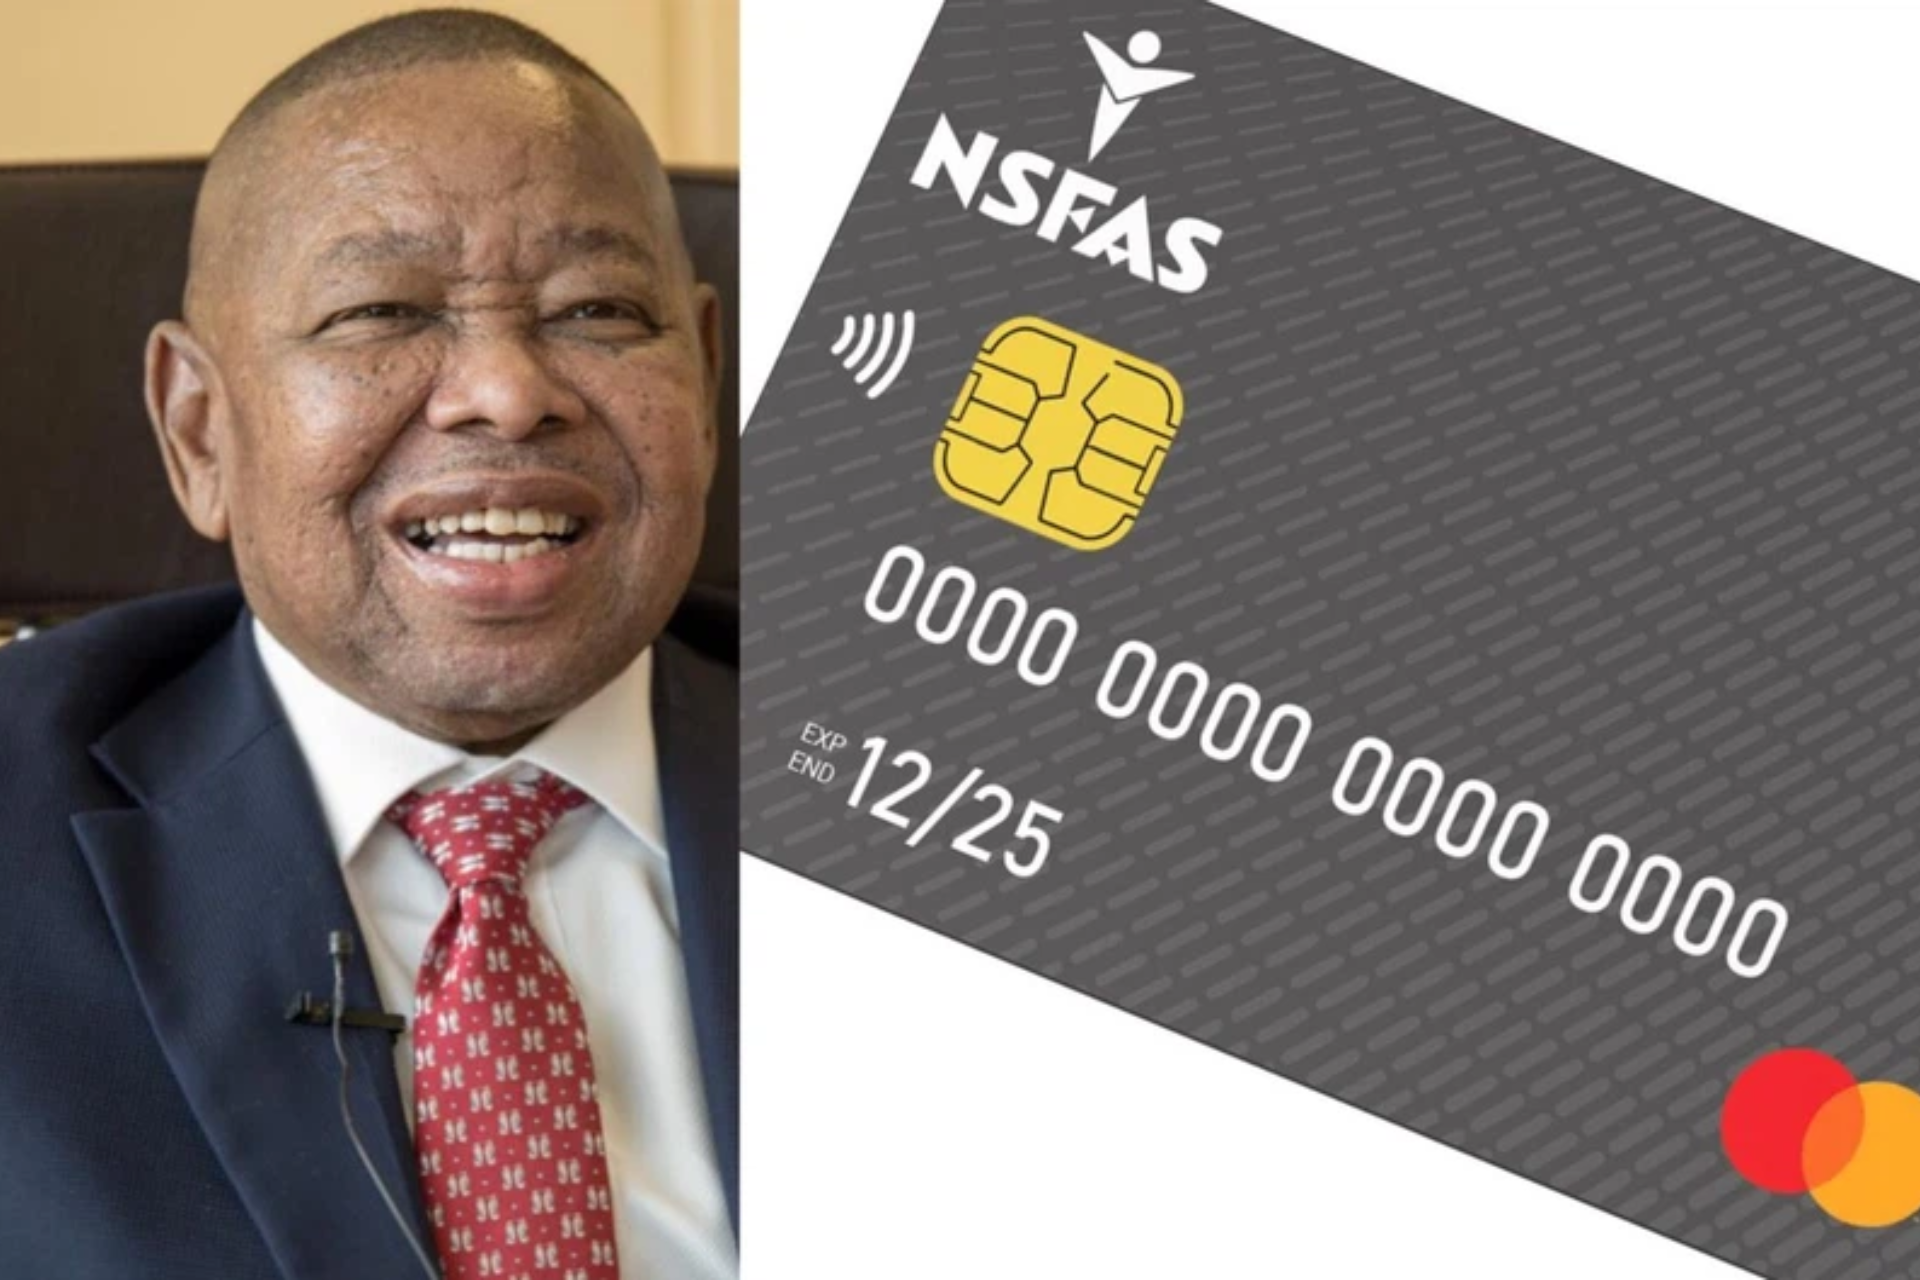 NSFAS vs ActionSA vs Minister Blade Nzimande's proposed fee increase - Missing middle